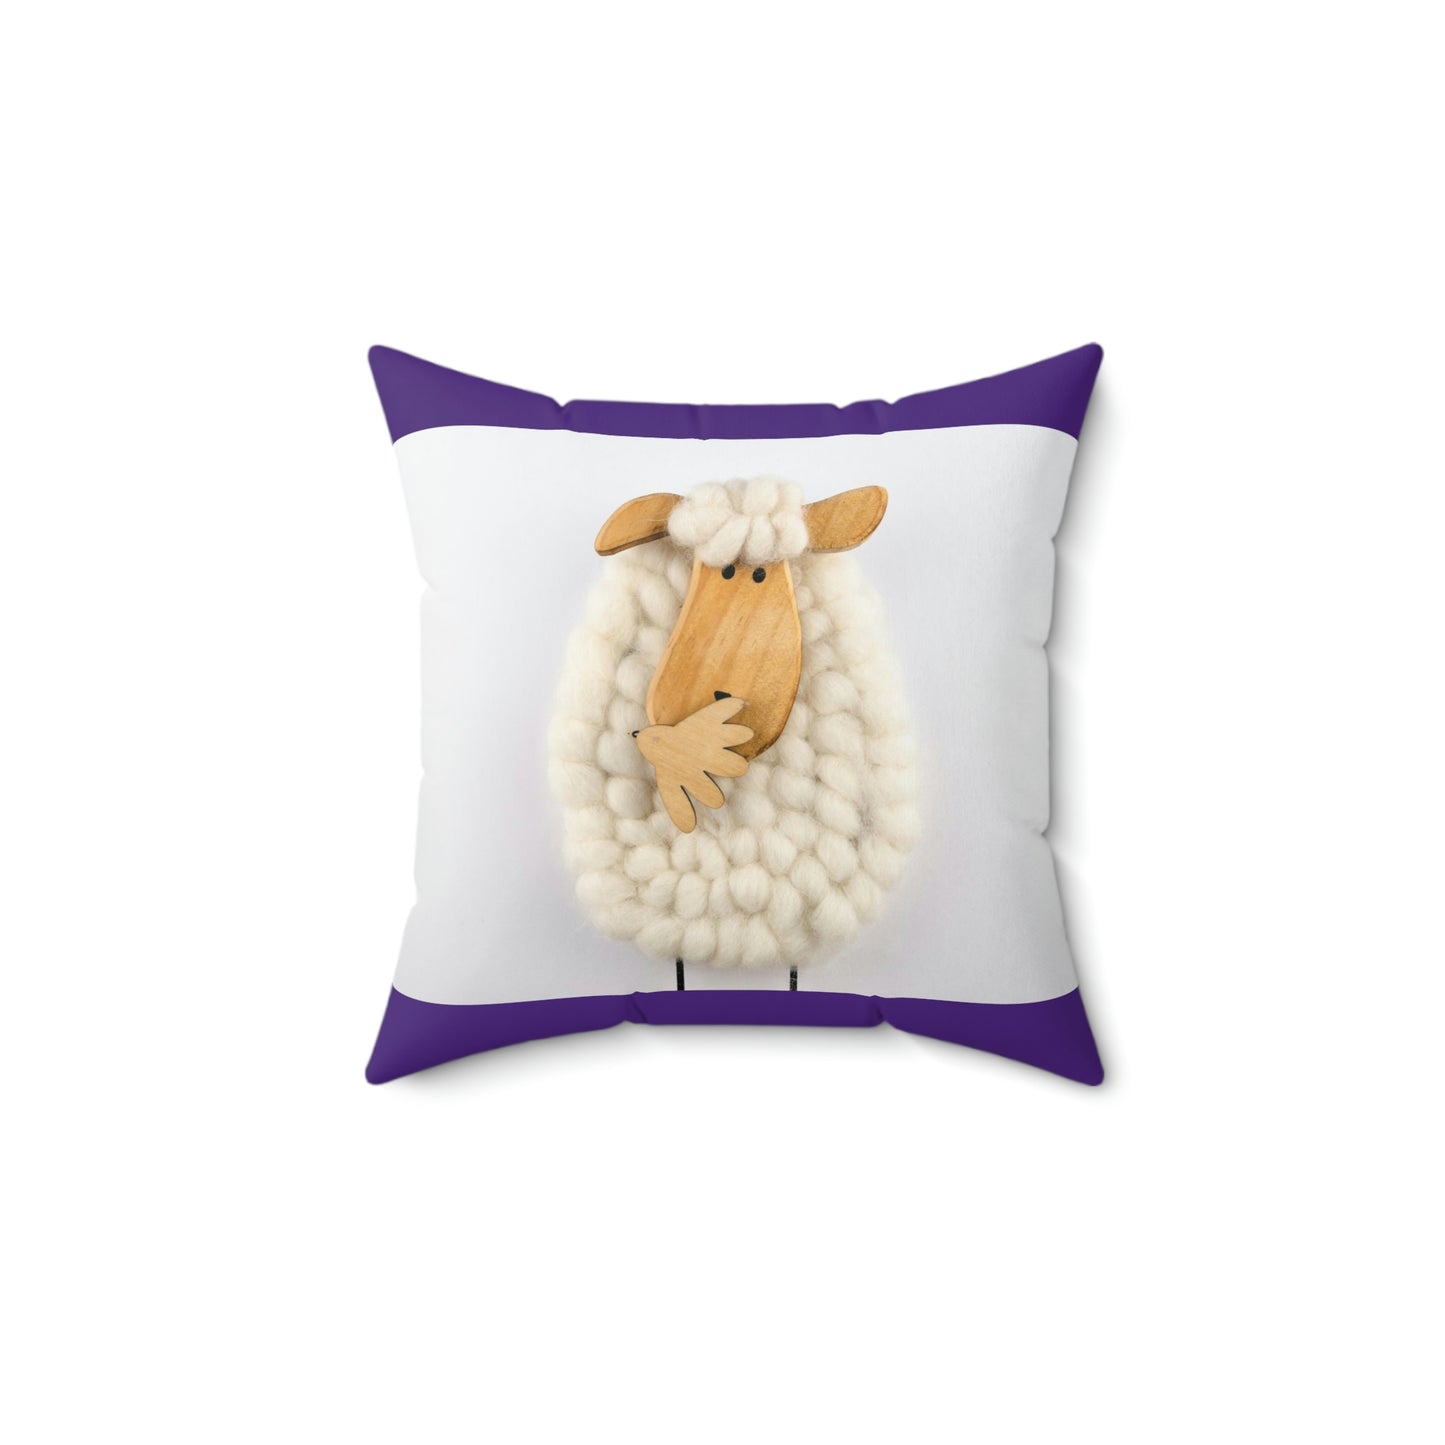 Sheep Pillow Case - Dark Purple and White Colors - Faux Suede Square Pillow Case